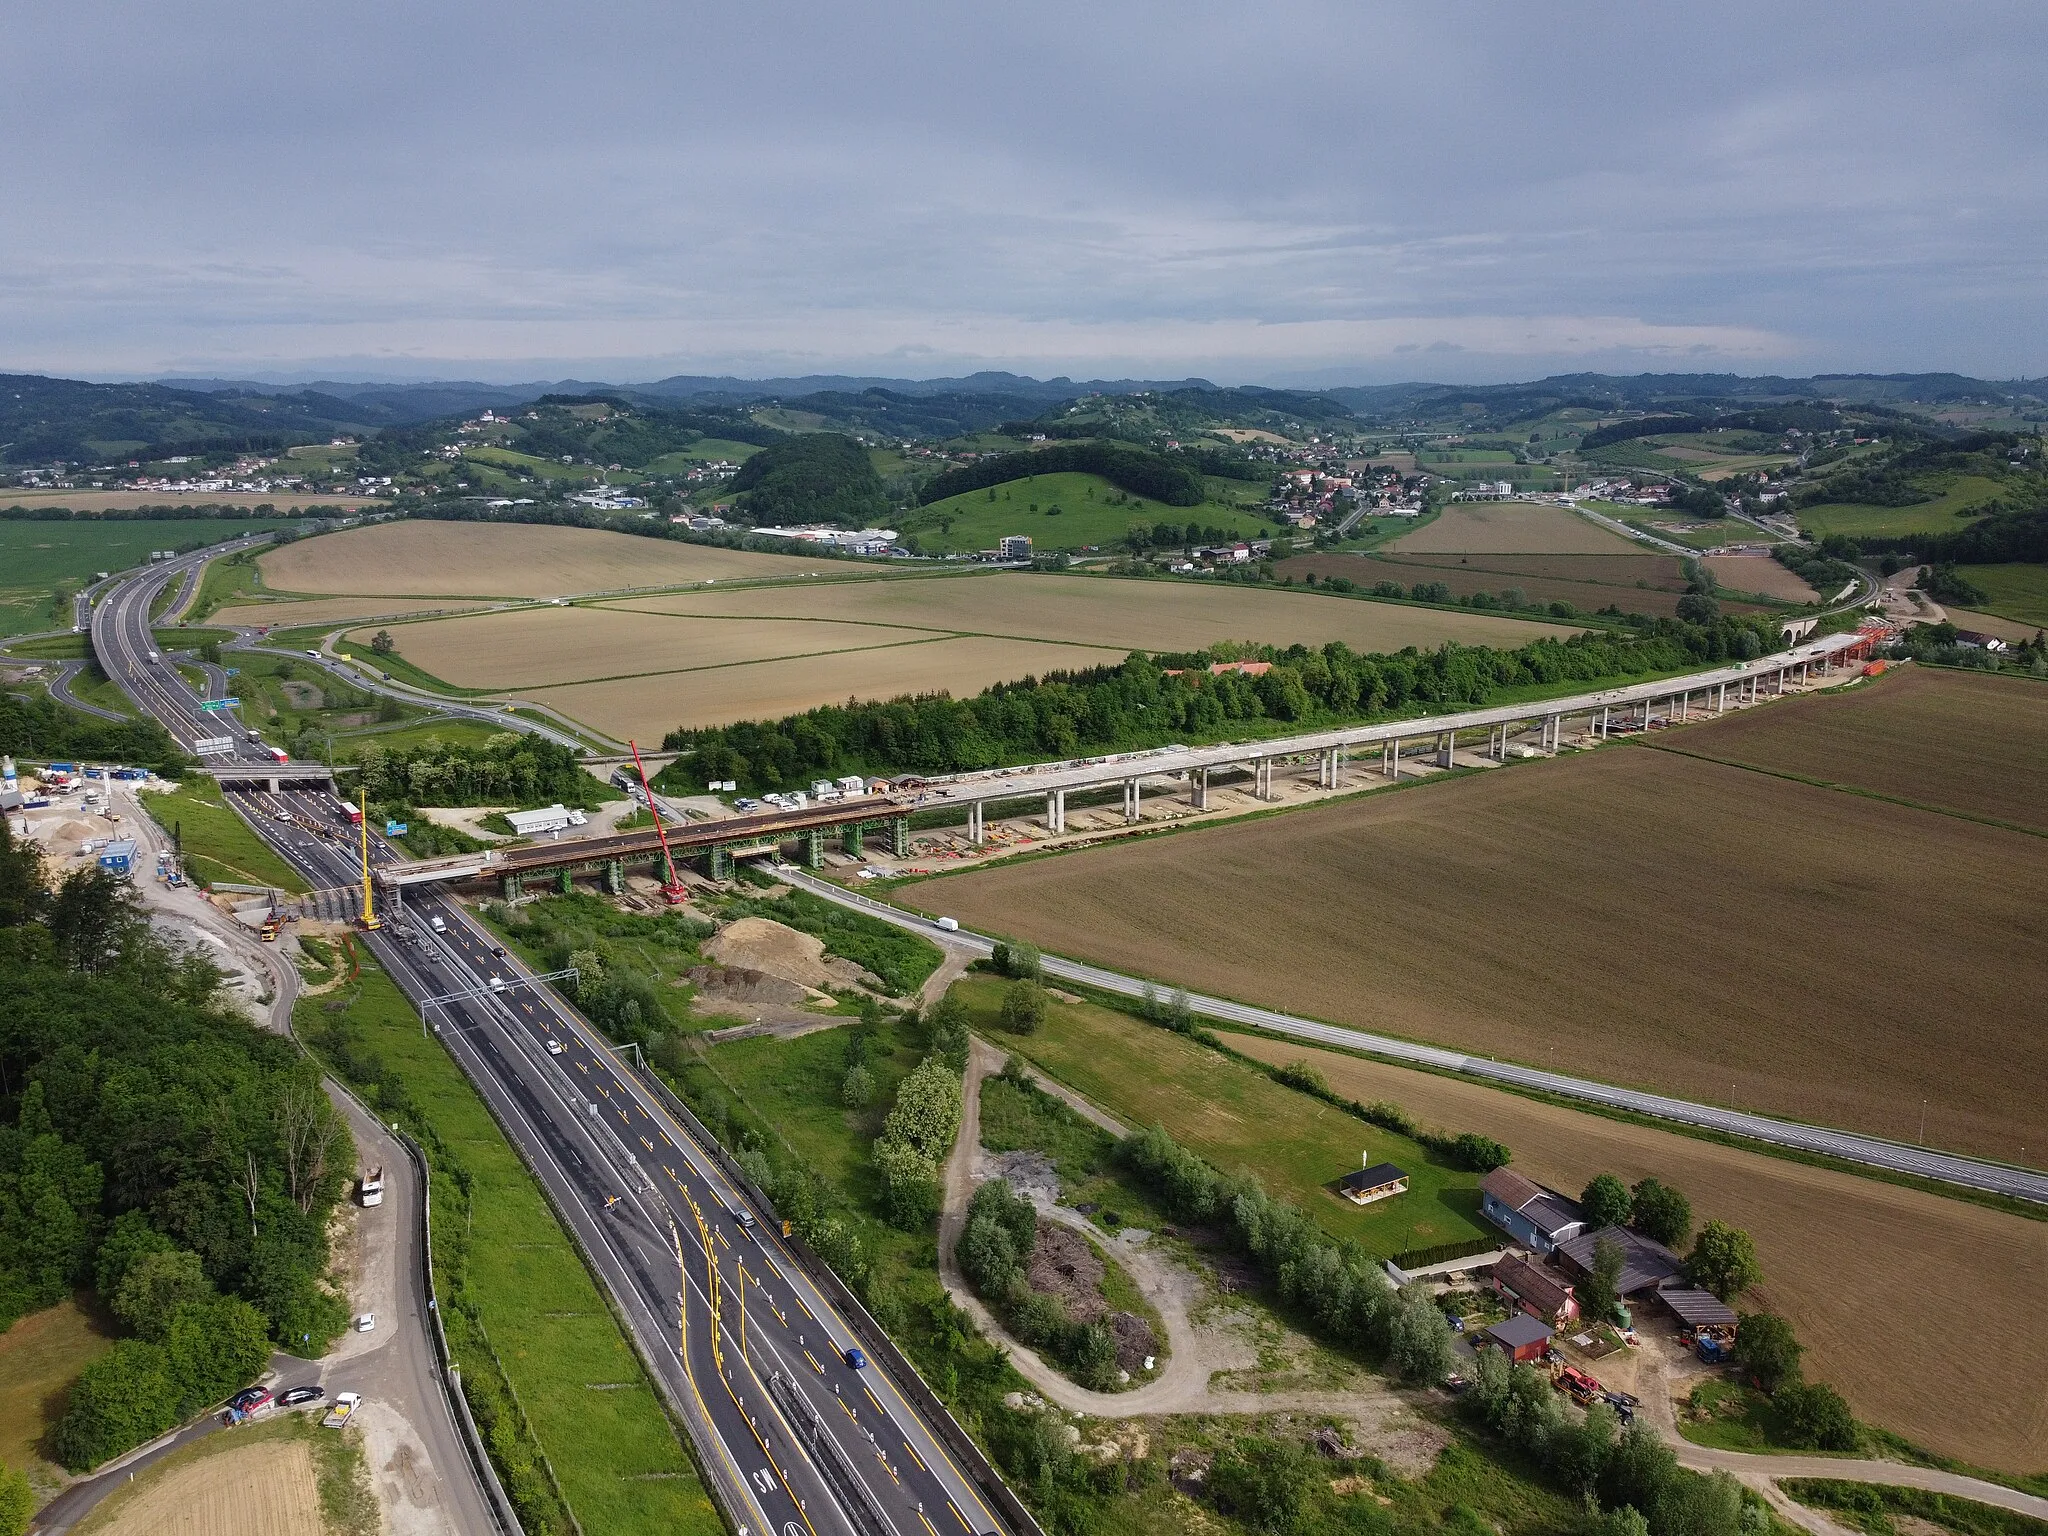 Photo showing: The new Pesnica viaduct will be a relatively low, 912.6-meter-long double-track railway viaduct. It is designed as a series of frame structures connected into an integral structure without bearings. This design concept allows the implementation of a continuous welded rail track (CWR) without expansion joints, with great advantages in terms of traffic safety, economy, sustainability and noise emissions. The new line is planned to open to traffic in mid-2023.